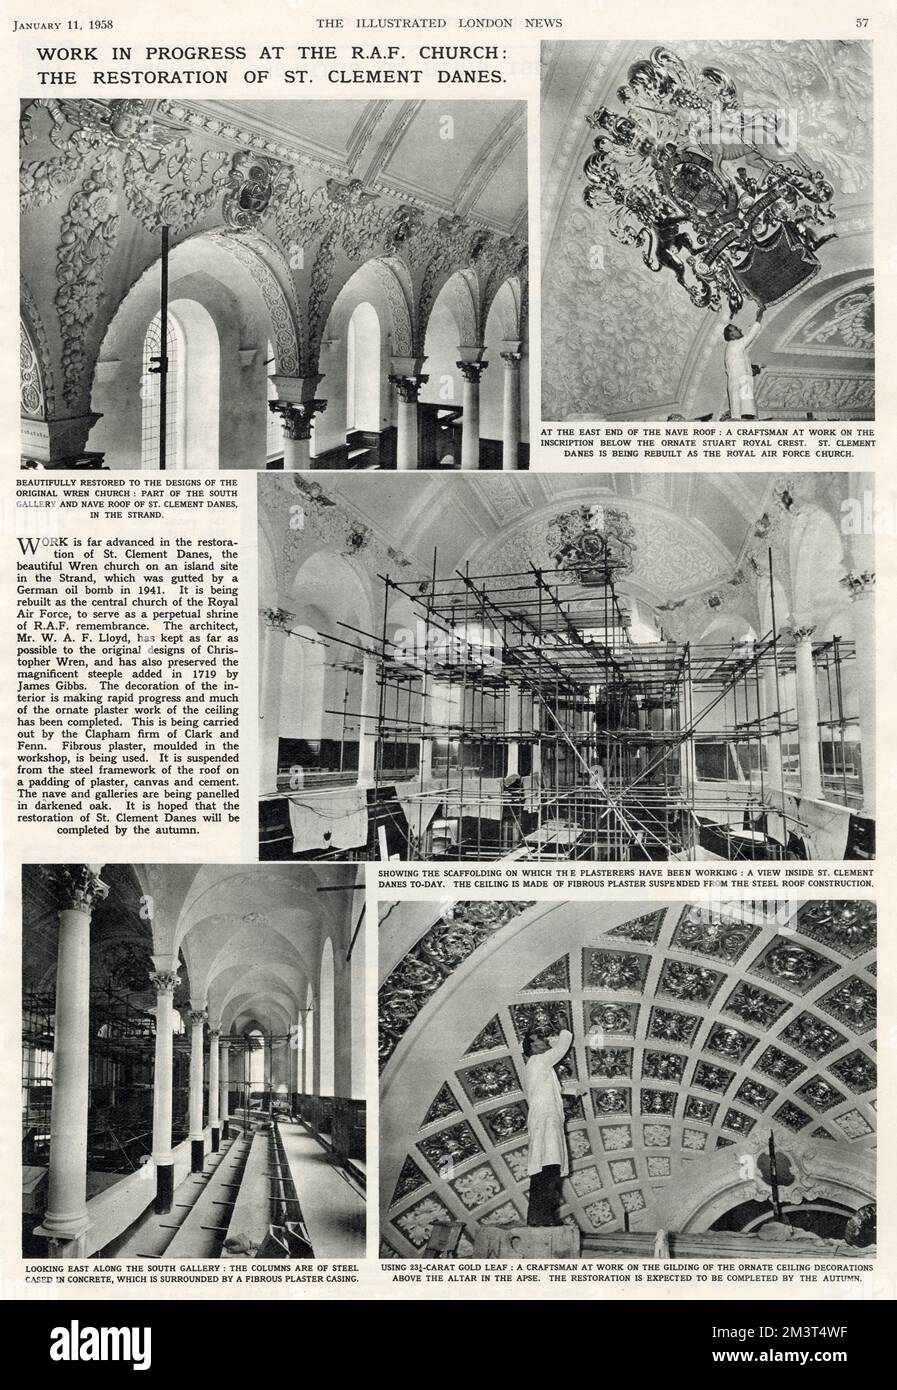 Work in progress at the Royal Air Force church: the restoration of St Clement Danes, the Wren church on an island site in the Strand, London, which was gutted by a German oil bomb in 1941. The decoration of the interior is making rapid progress and much of the ornate plaster work of the ceiling, using fibrous plaster moulded in the workshop, has been completed. Stock Photo